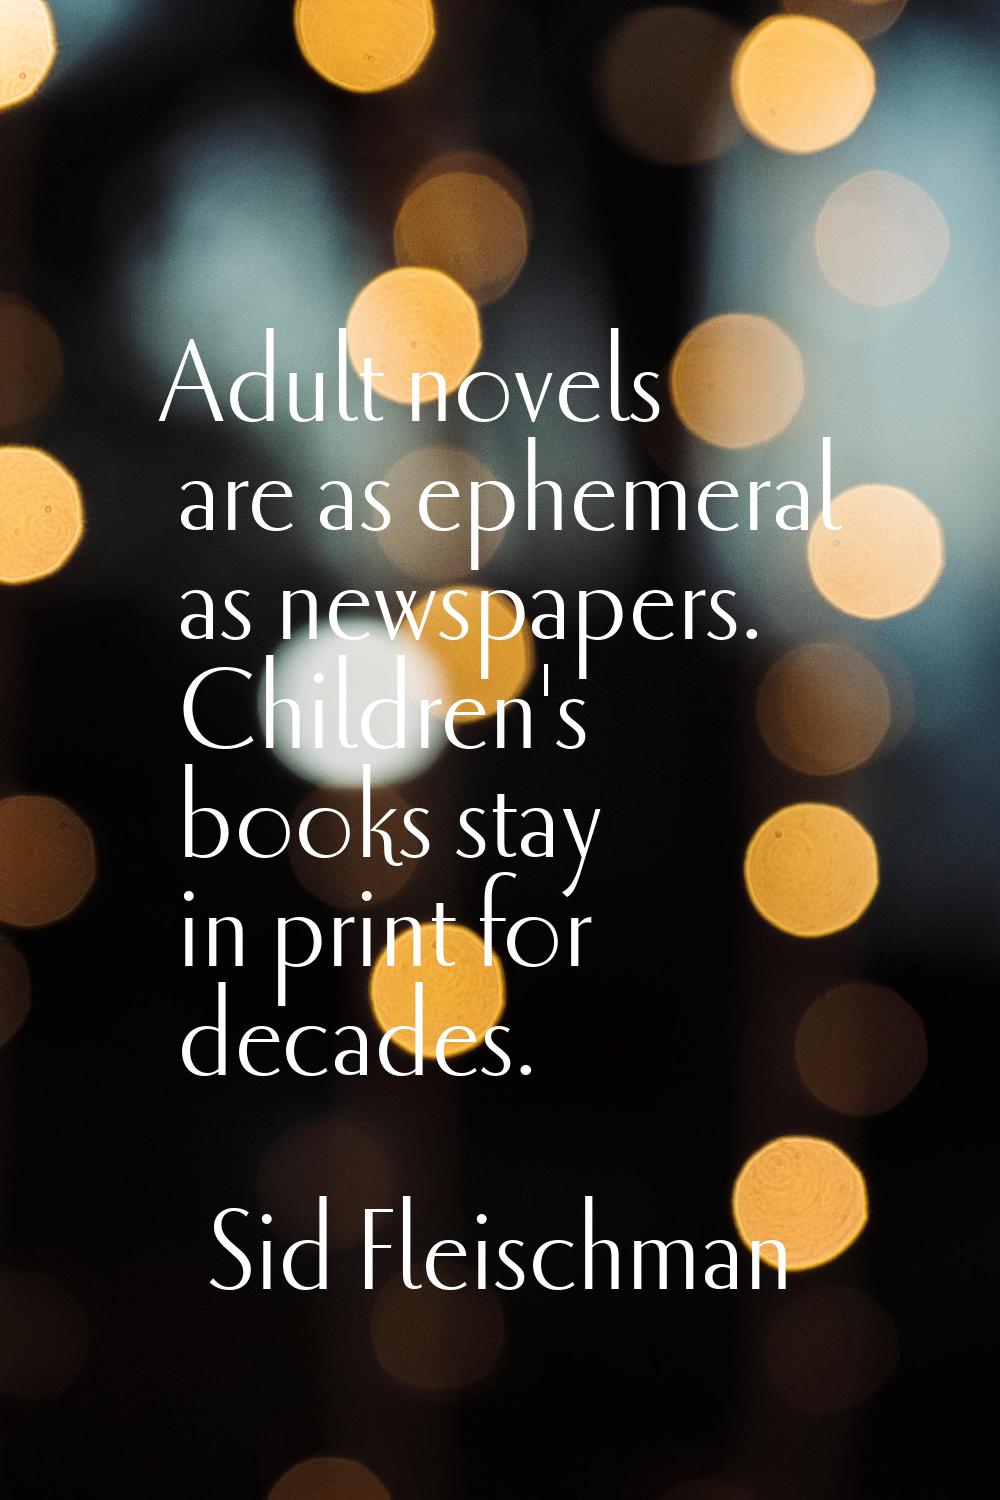 Adult novels are as ephemeral as newspapers. Children's books stay in print for decades.